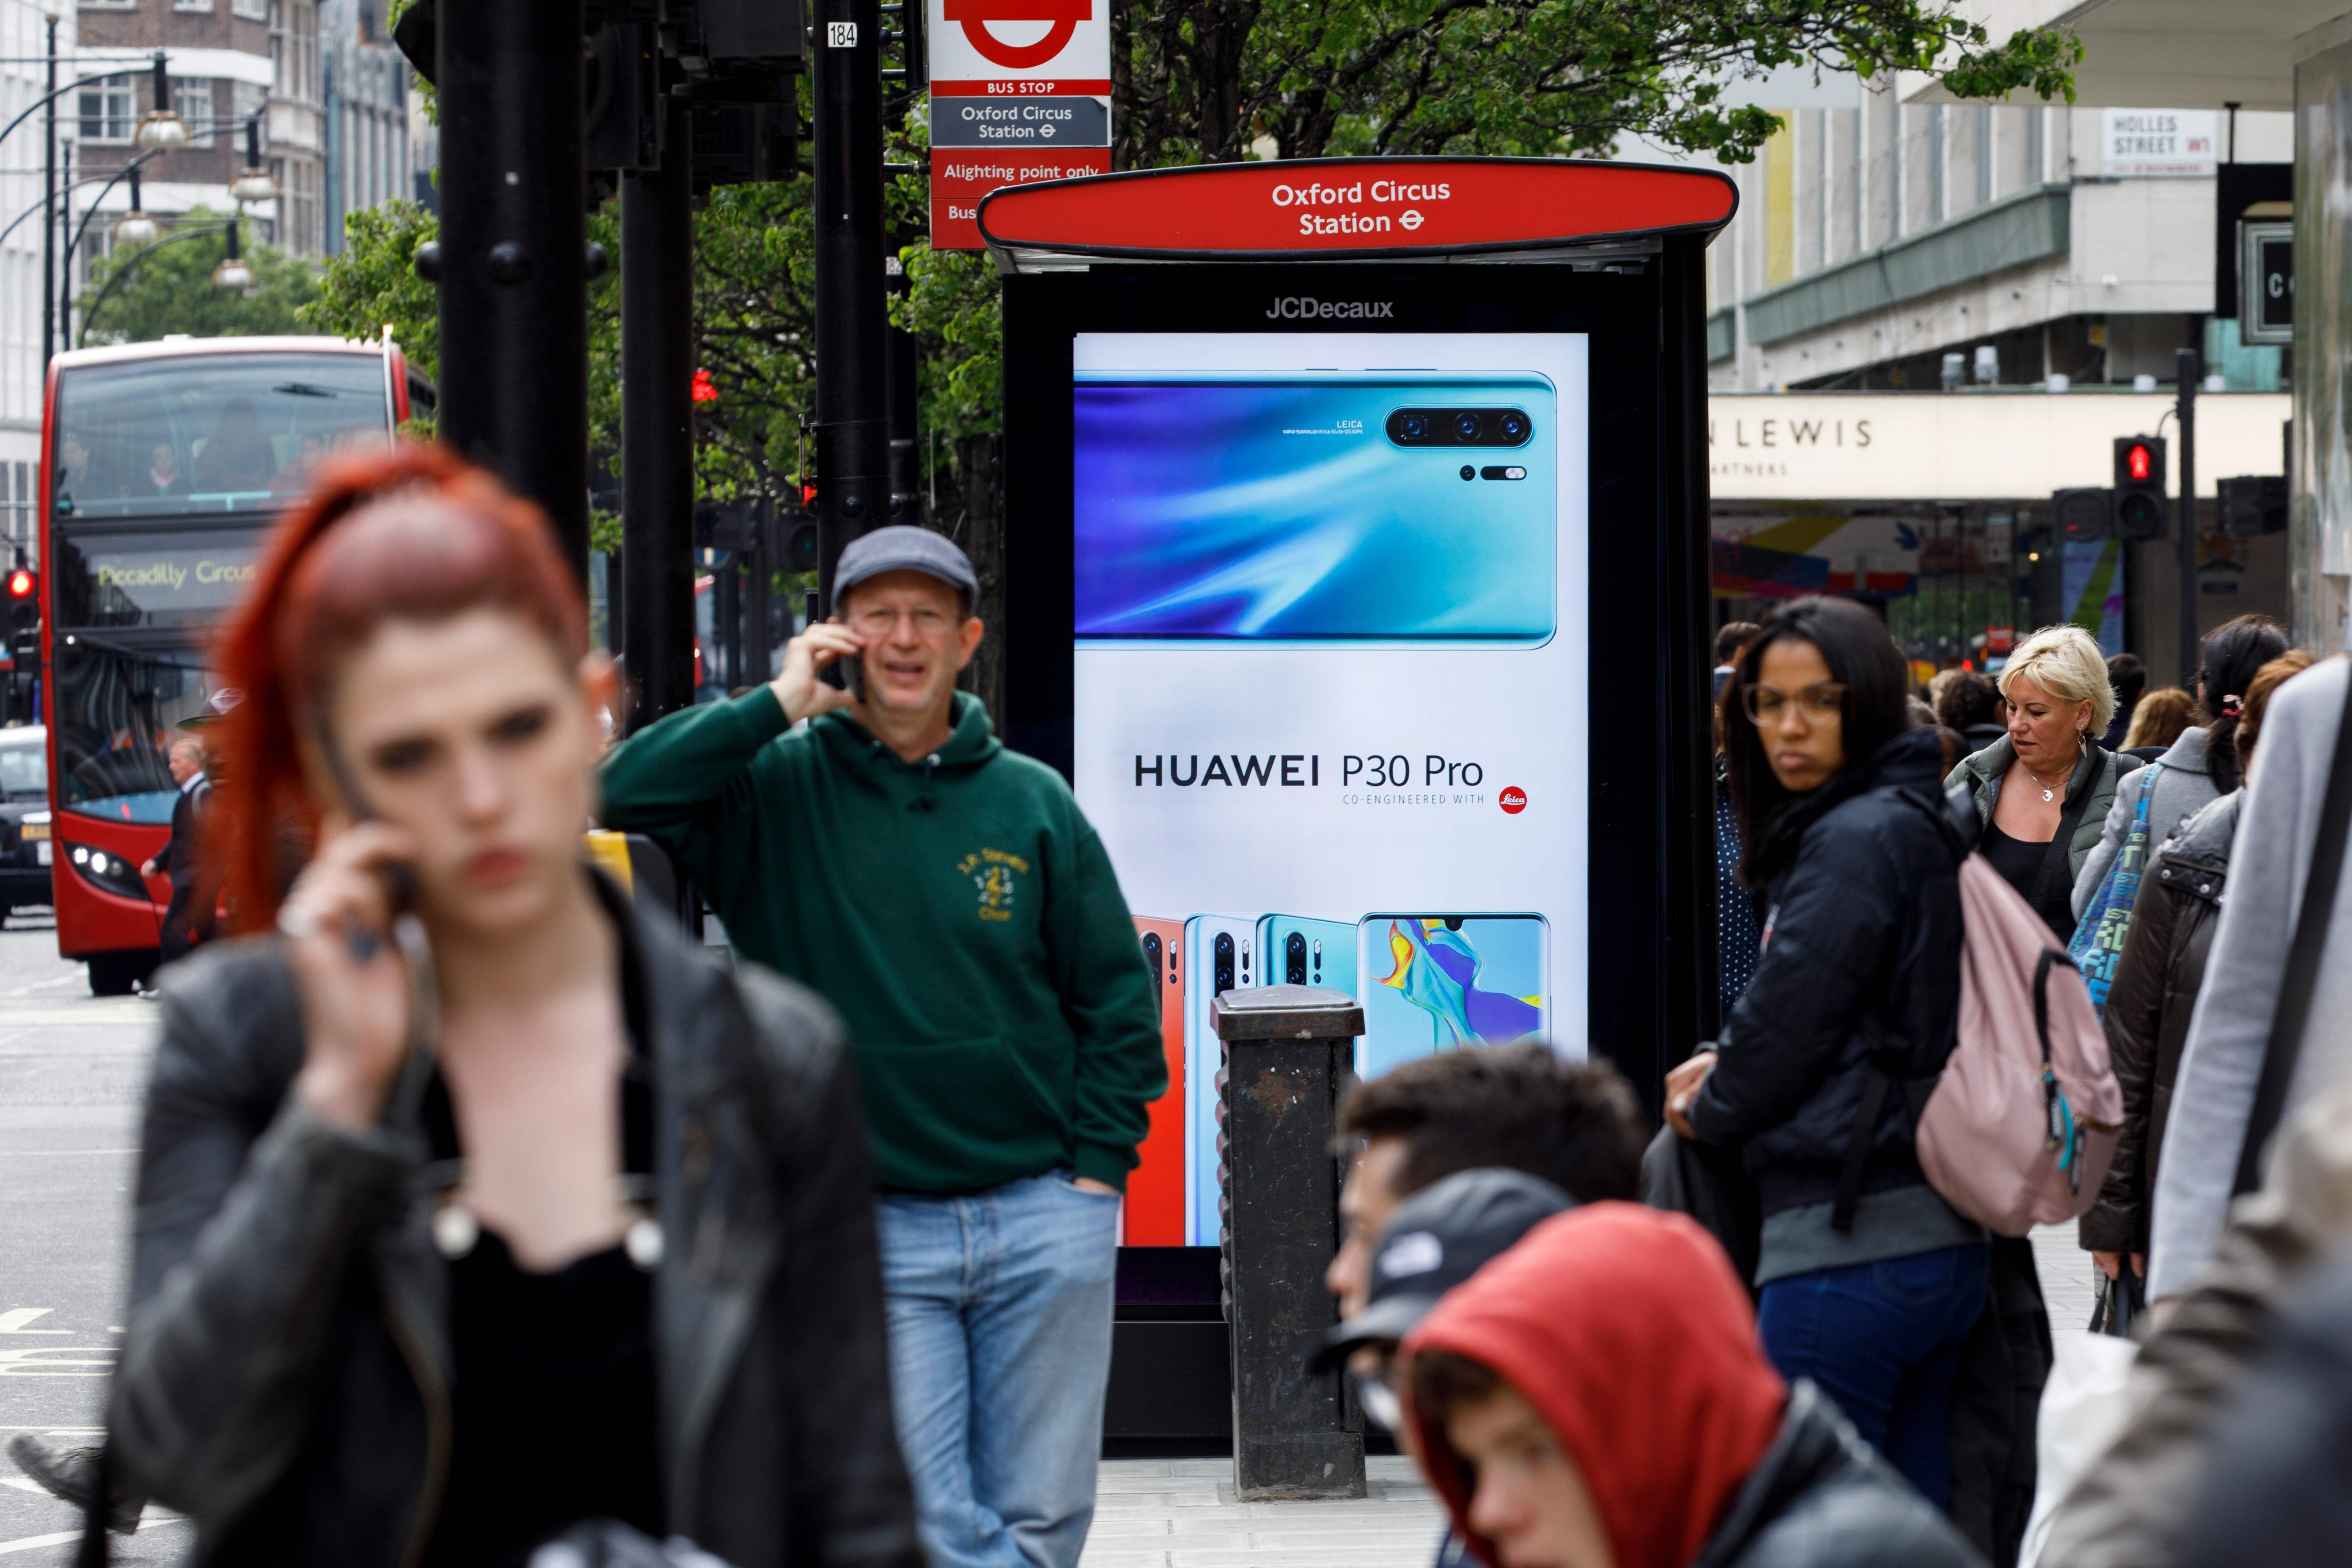 Huawei is looking to Europe for growth after coming under pressure in the United States. Photo: AFP